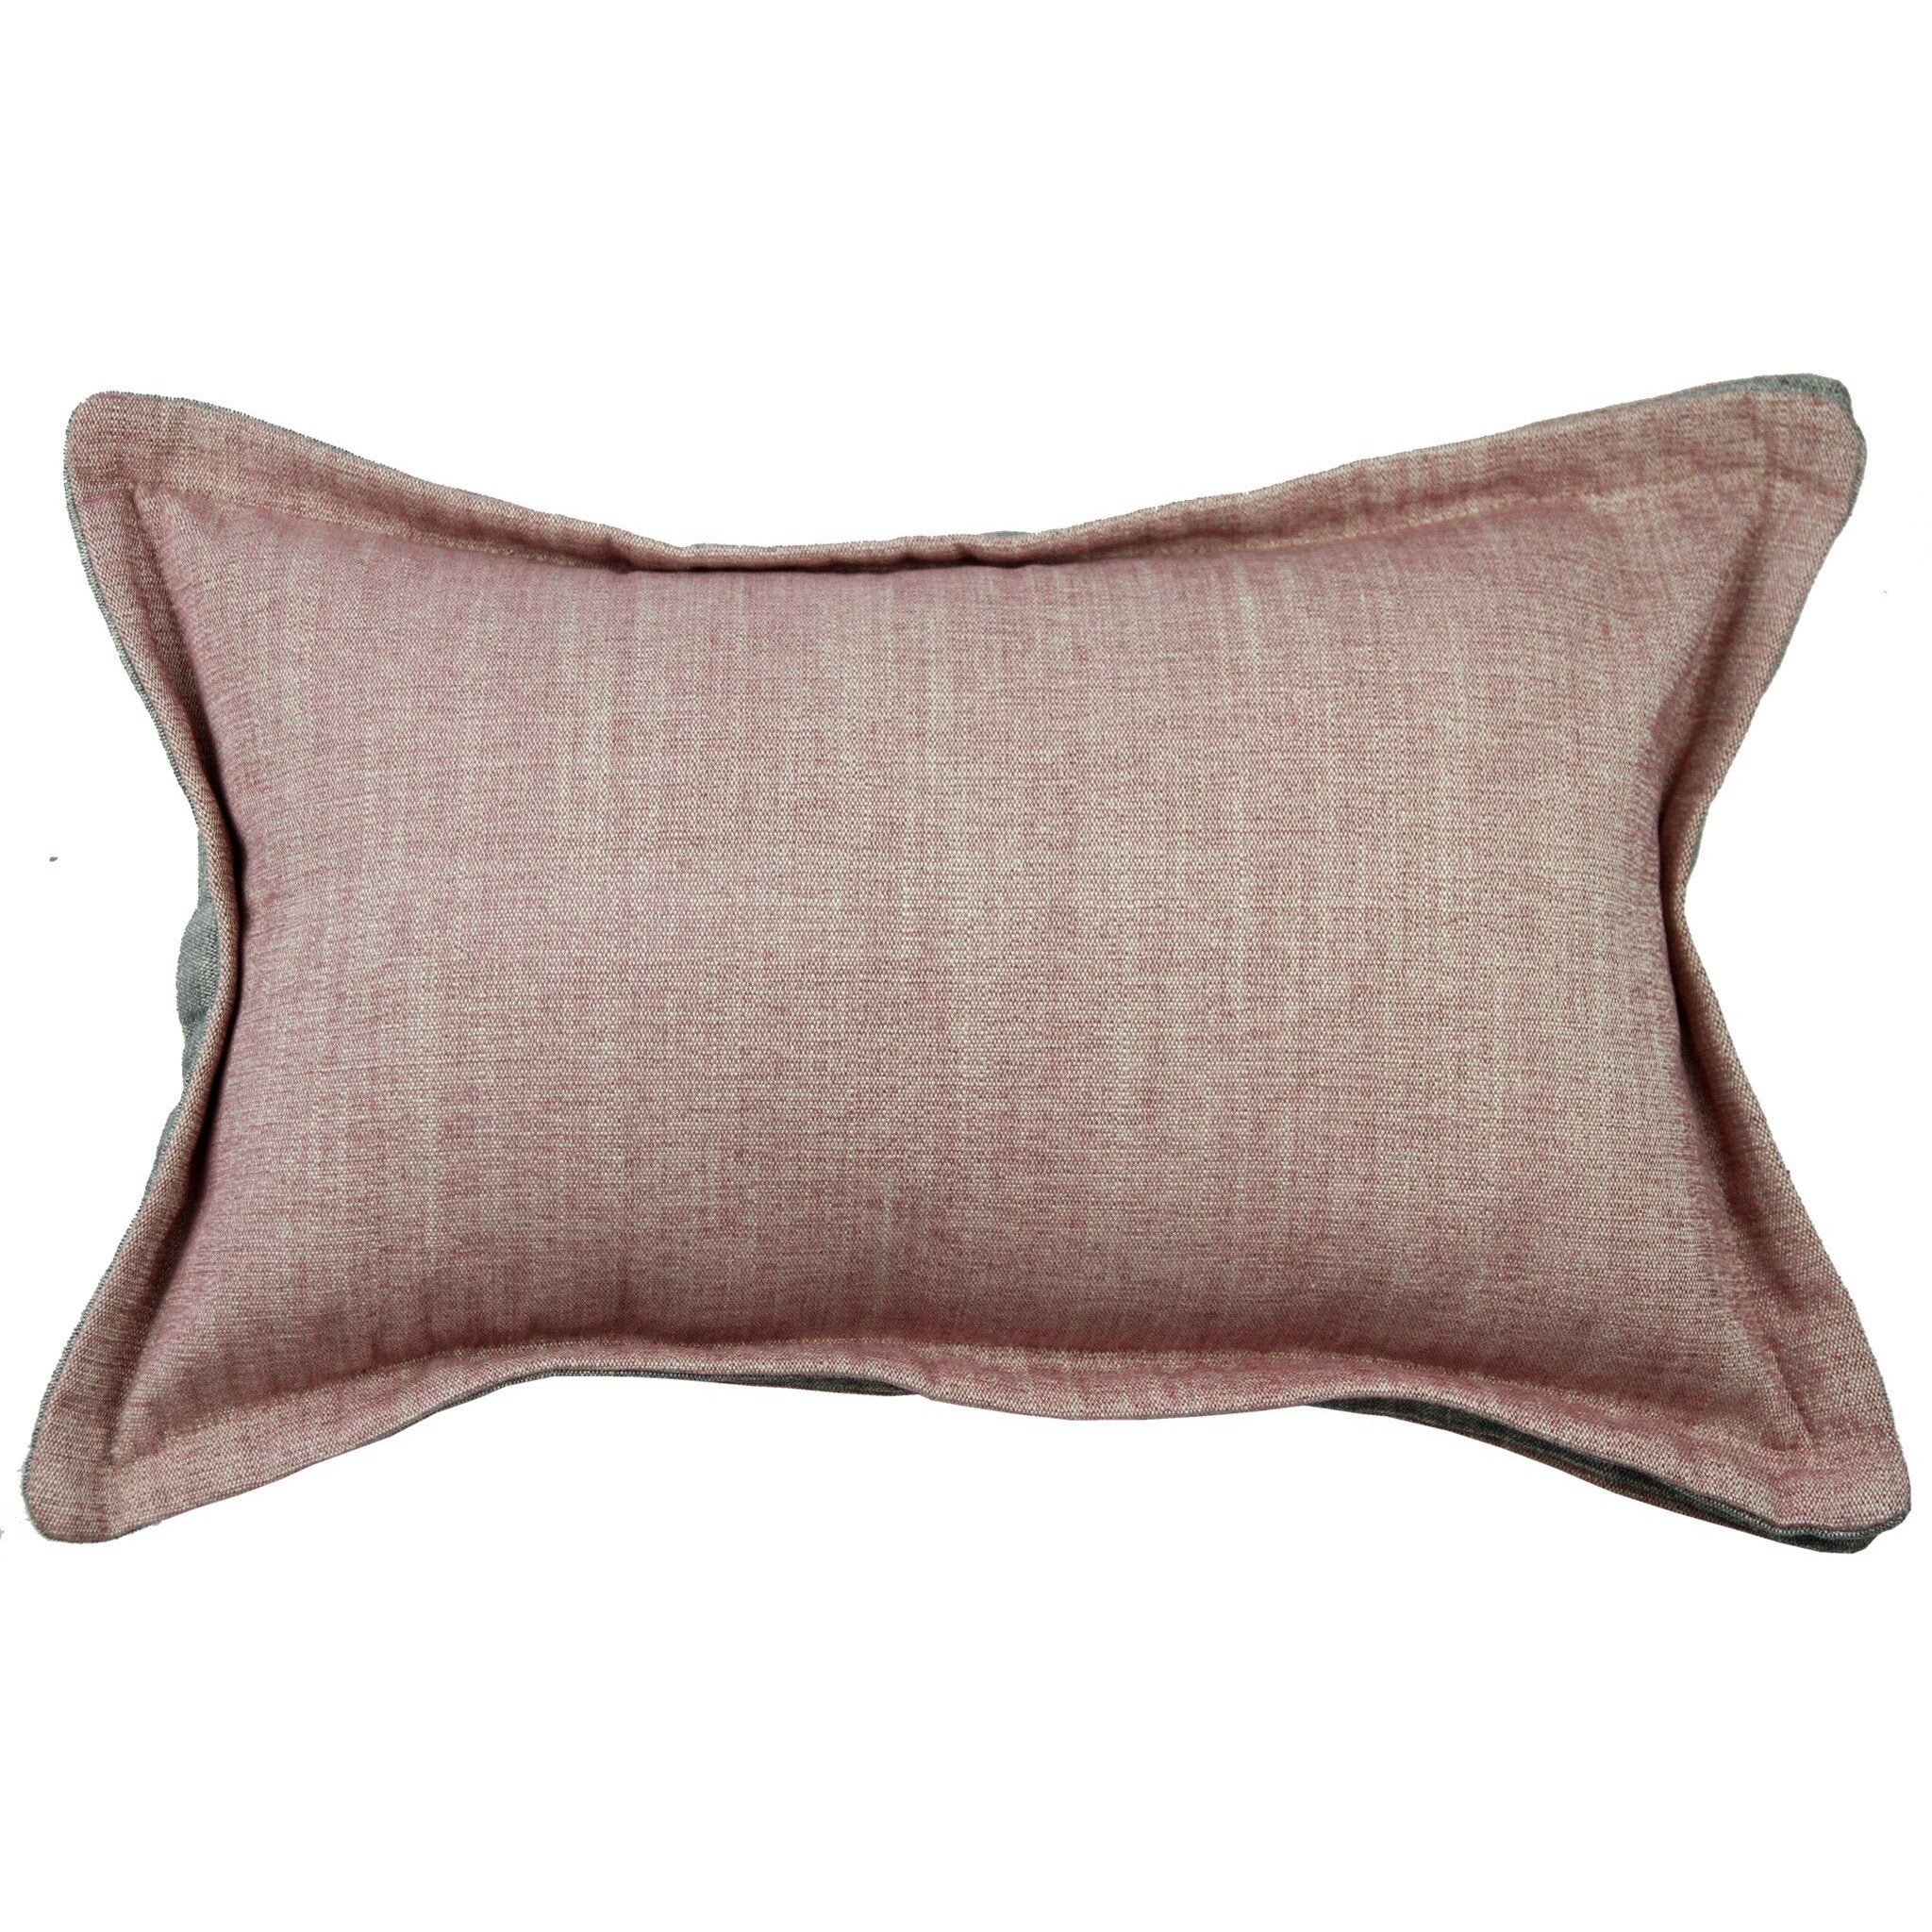 McAlister Textiles Rhumba Accent Blush Pink + Grey Cushion Cushions and Covers Cover Only 50cm x 30cm 